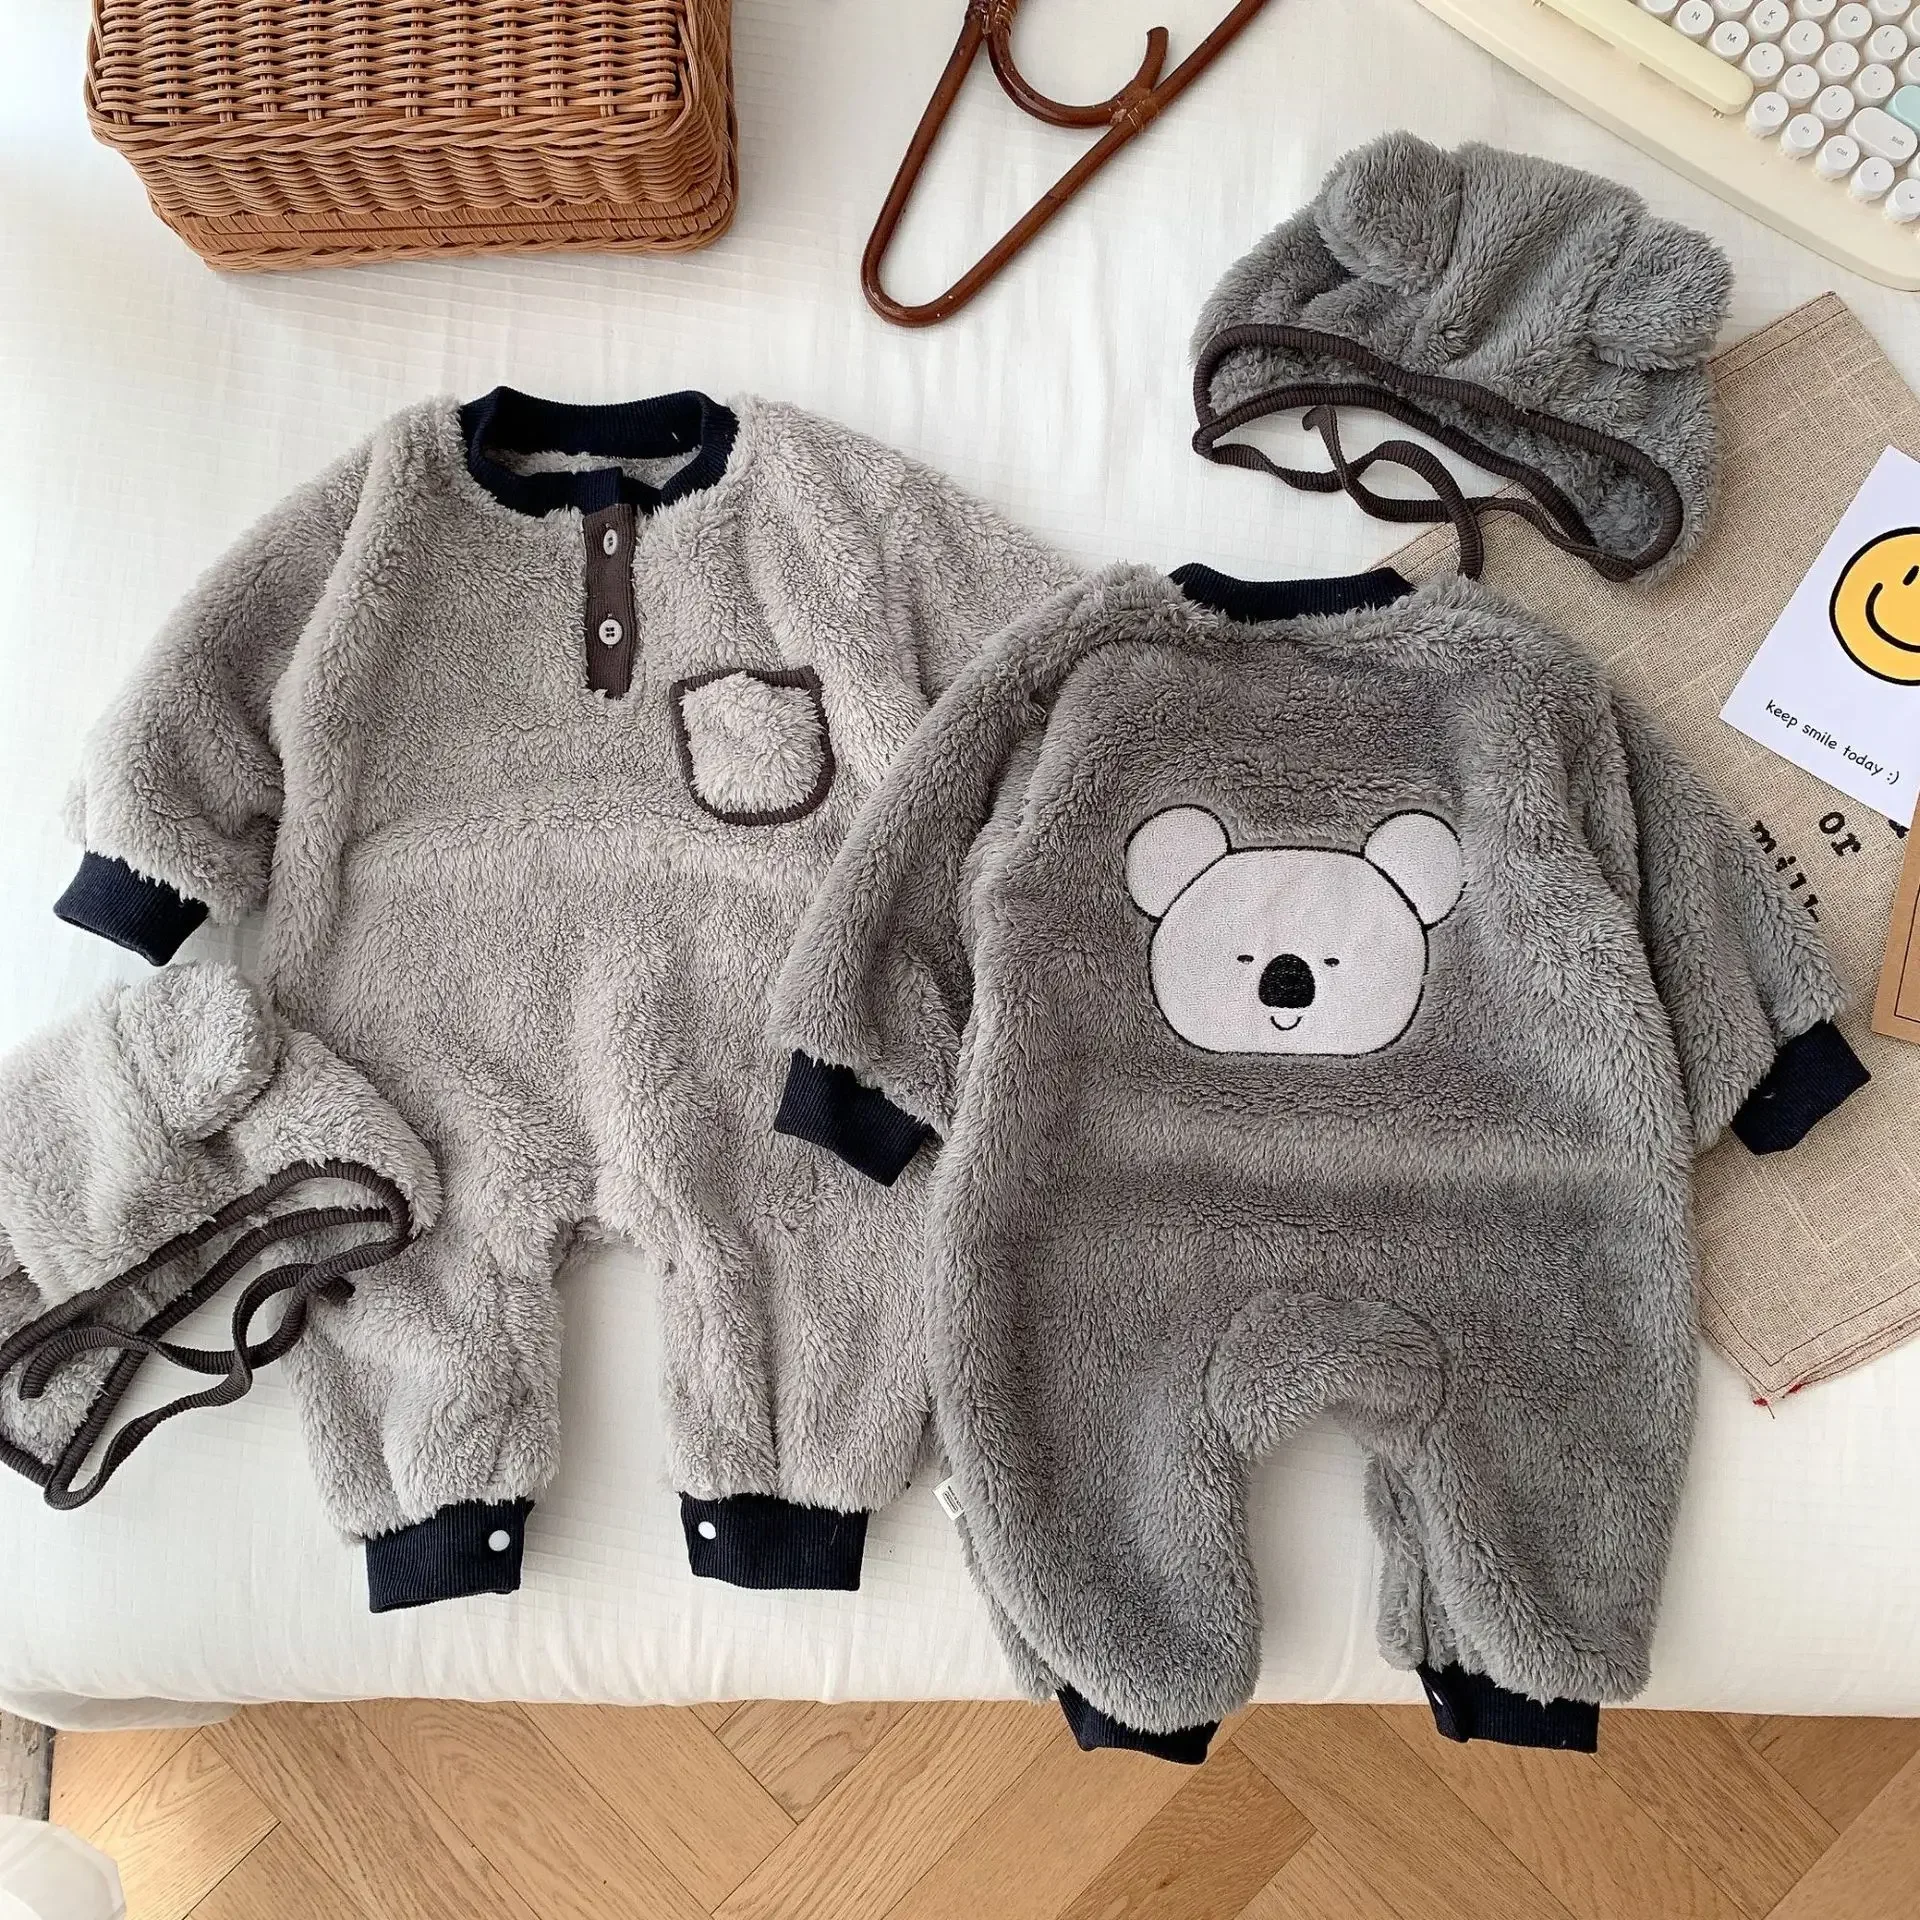 

Winter-Proof Infant Baby Clothes: 0-2 Years Old Double-sided Plush Bears Boys & Girls, Snug Cozy Kids Newborn One-piece Romper